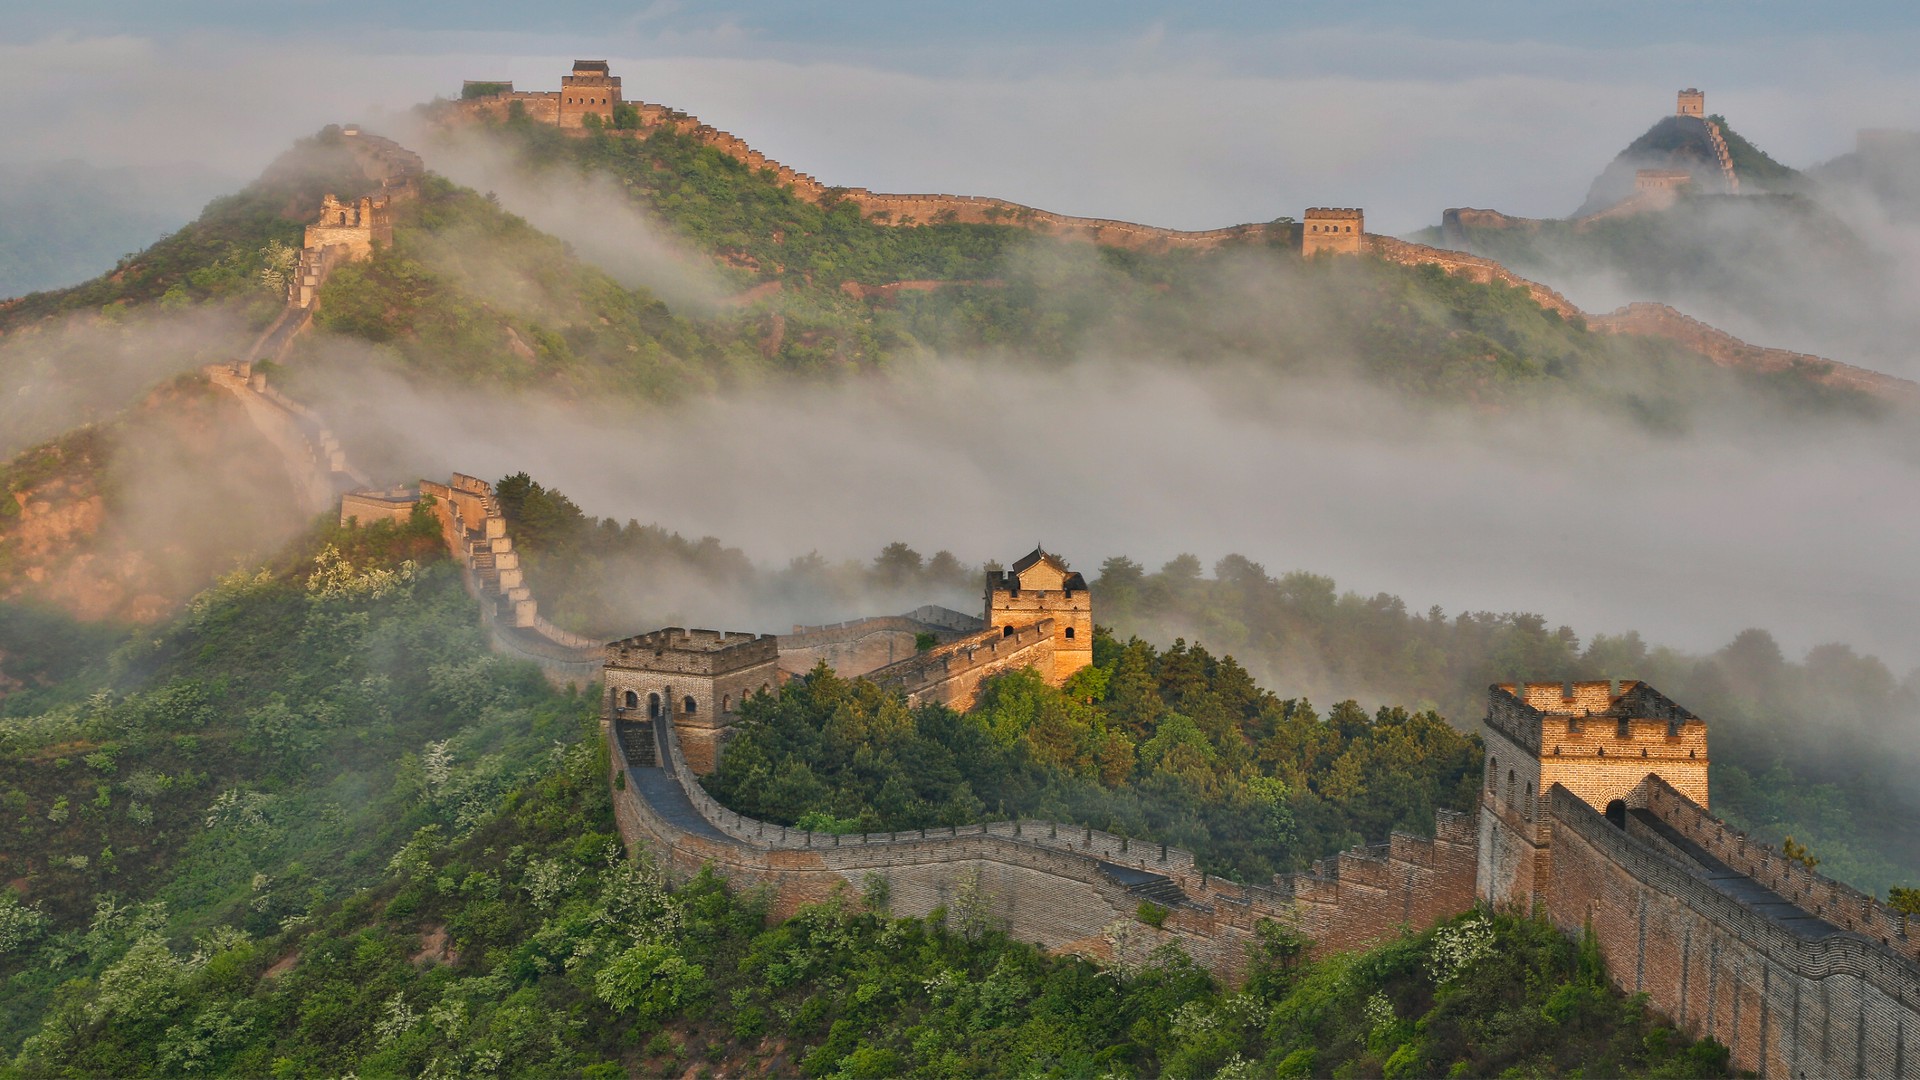 Fog along the Great Wall of China snaking along the mountainous landscape.